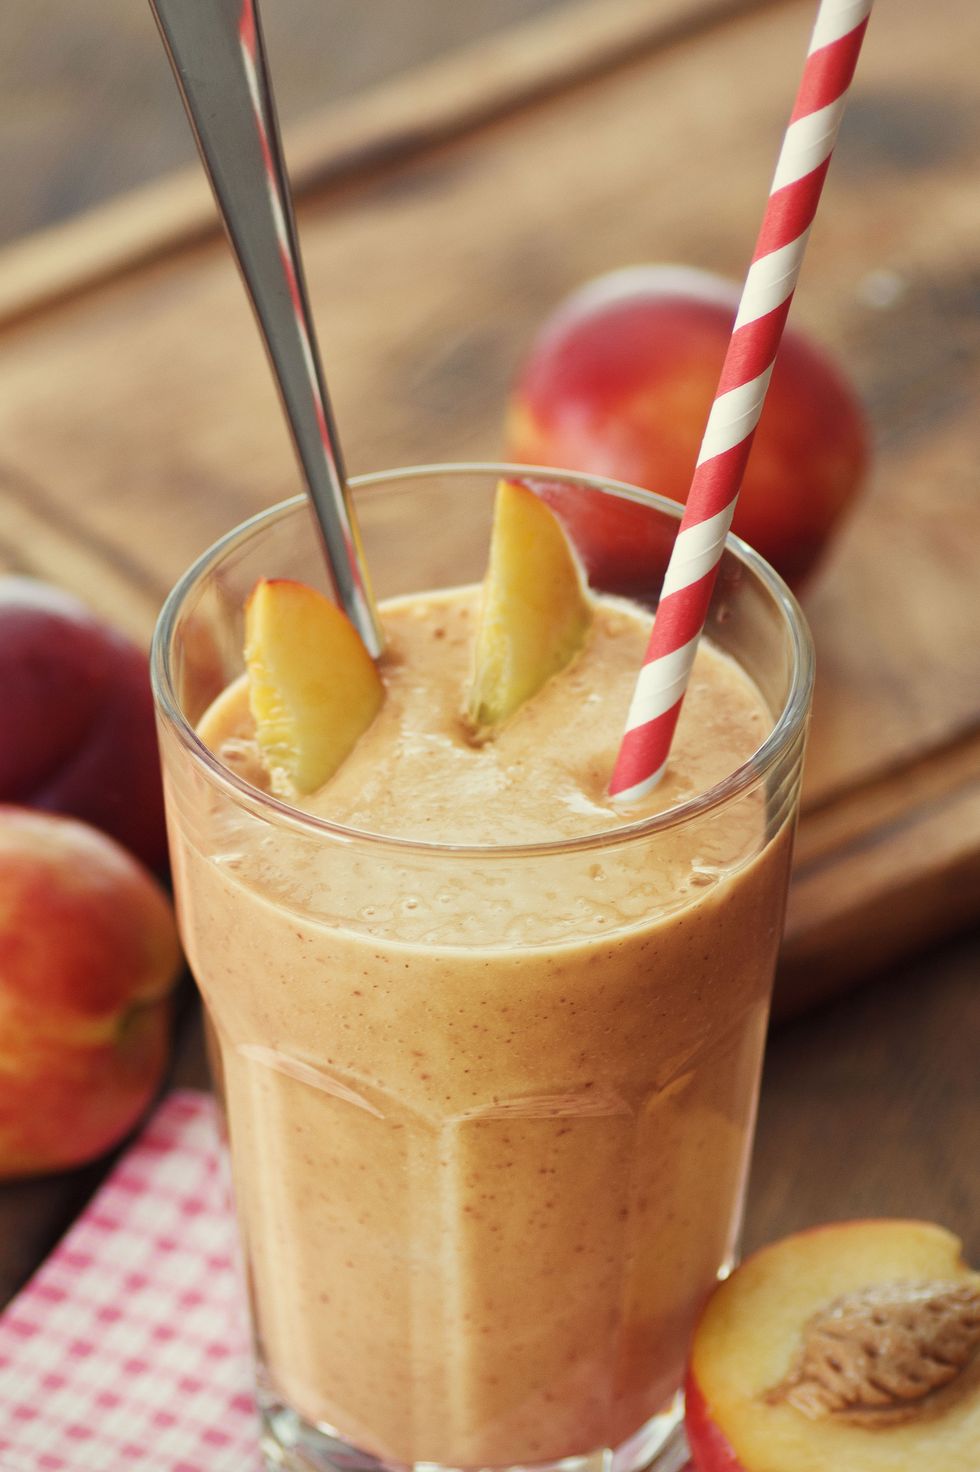 Food, Ingredient, Drink, Drinking straw, Peach, Fruit, Health shake, Recipe, Non-alcoholic beverage, Natural foods, 